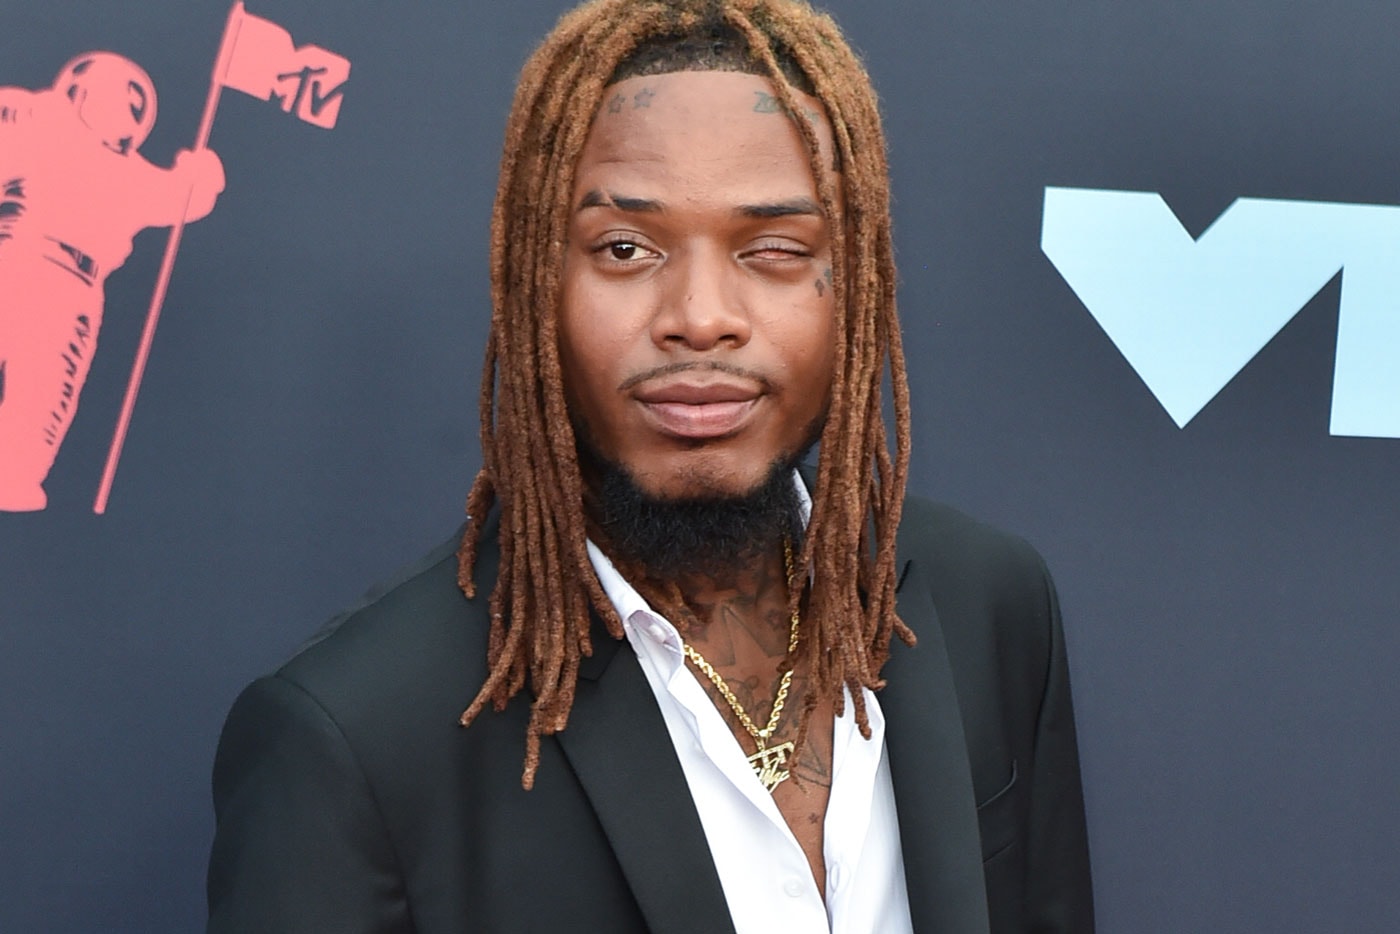 Fetty Wap Got Snubbed by the GRAMMYs, According to 50 Cent